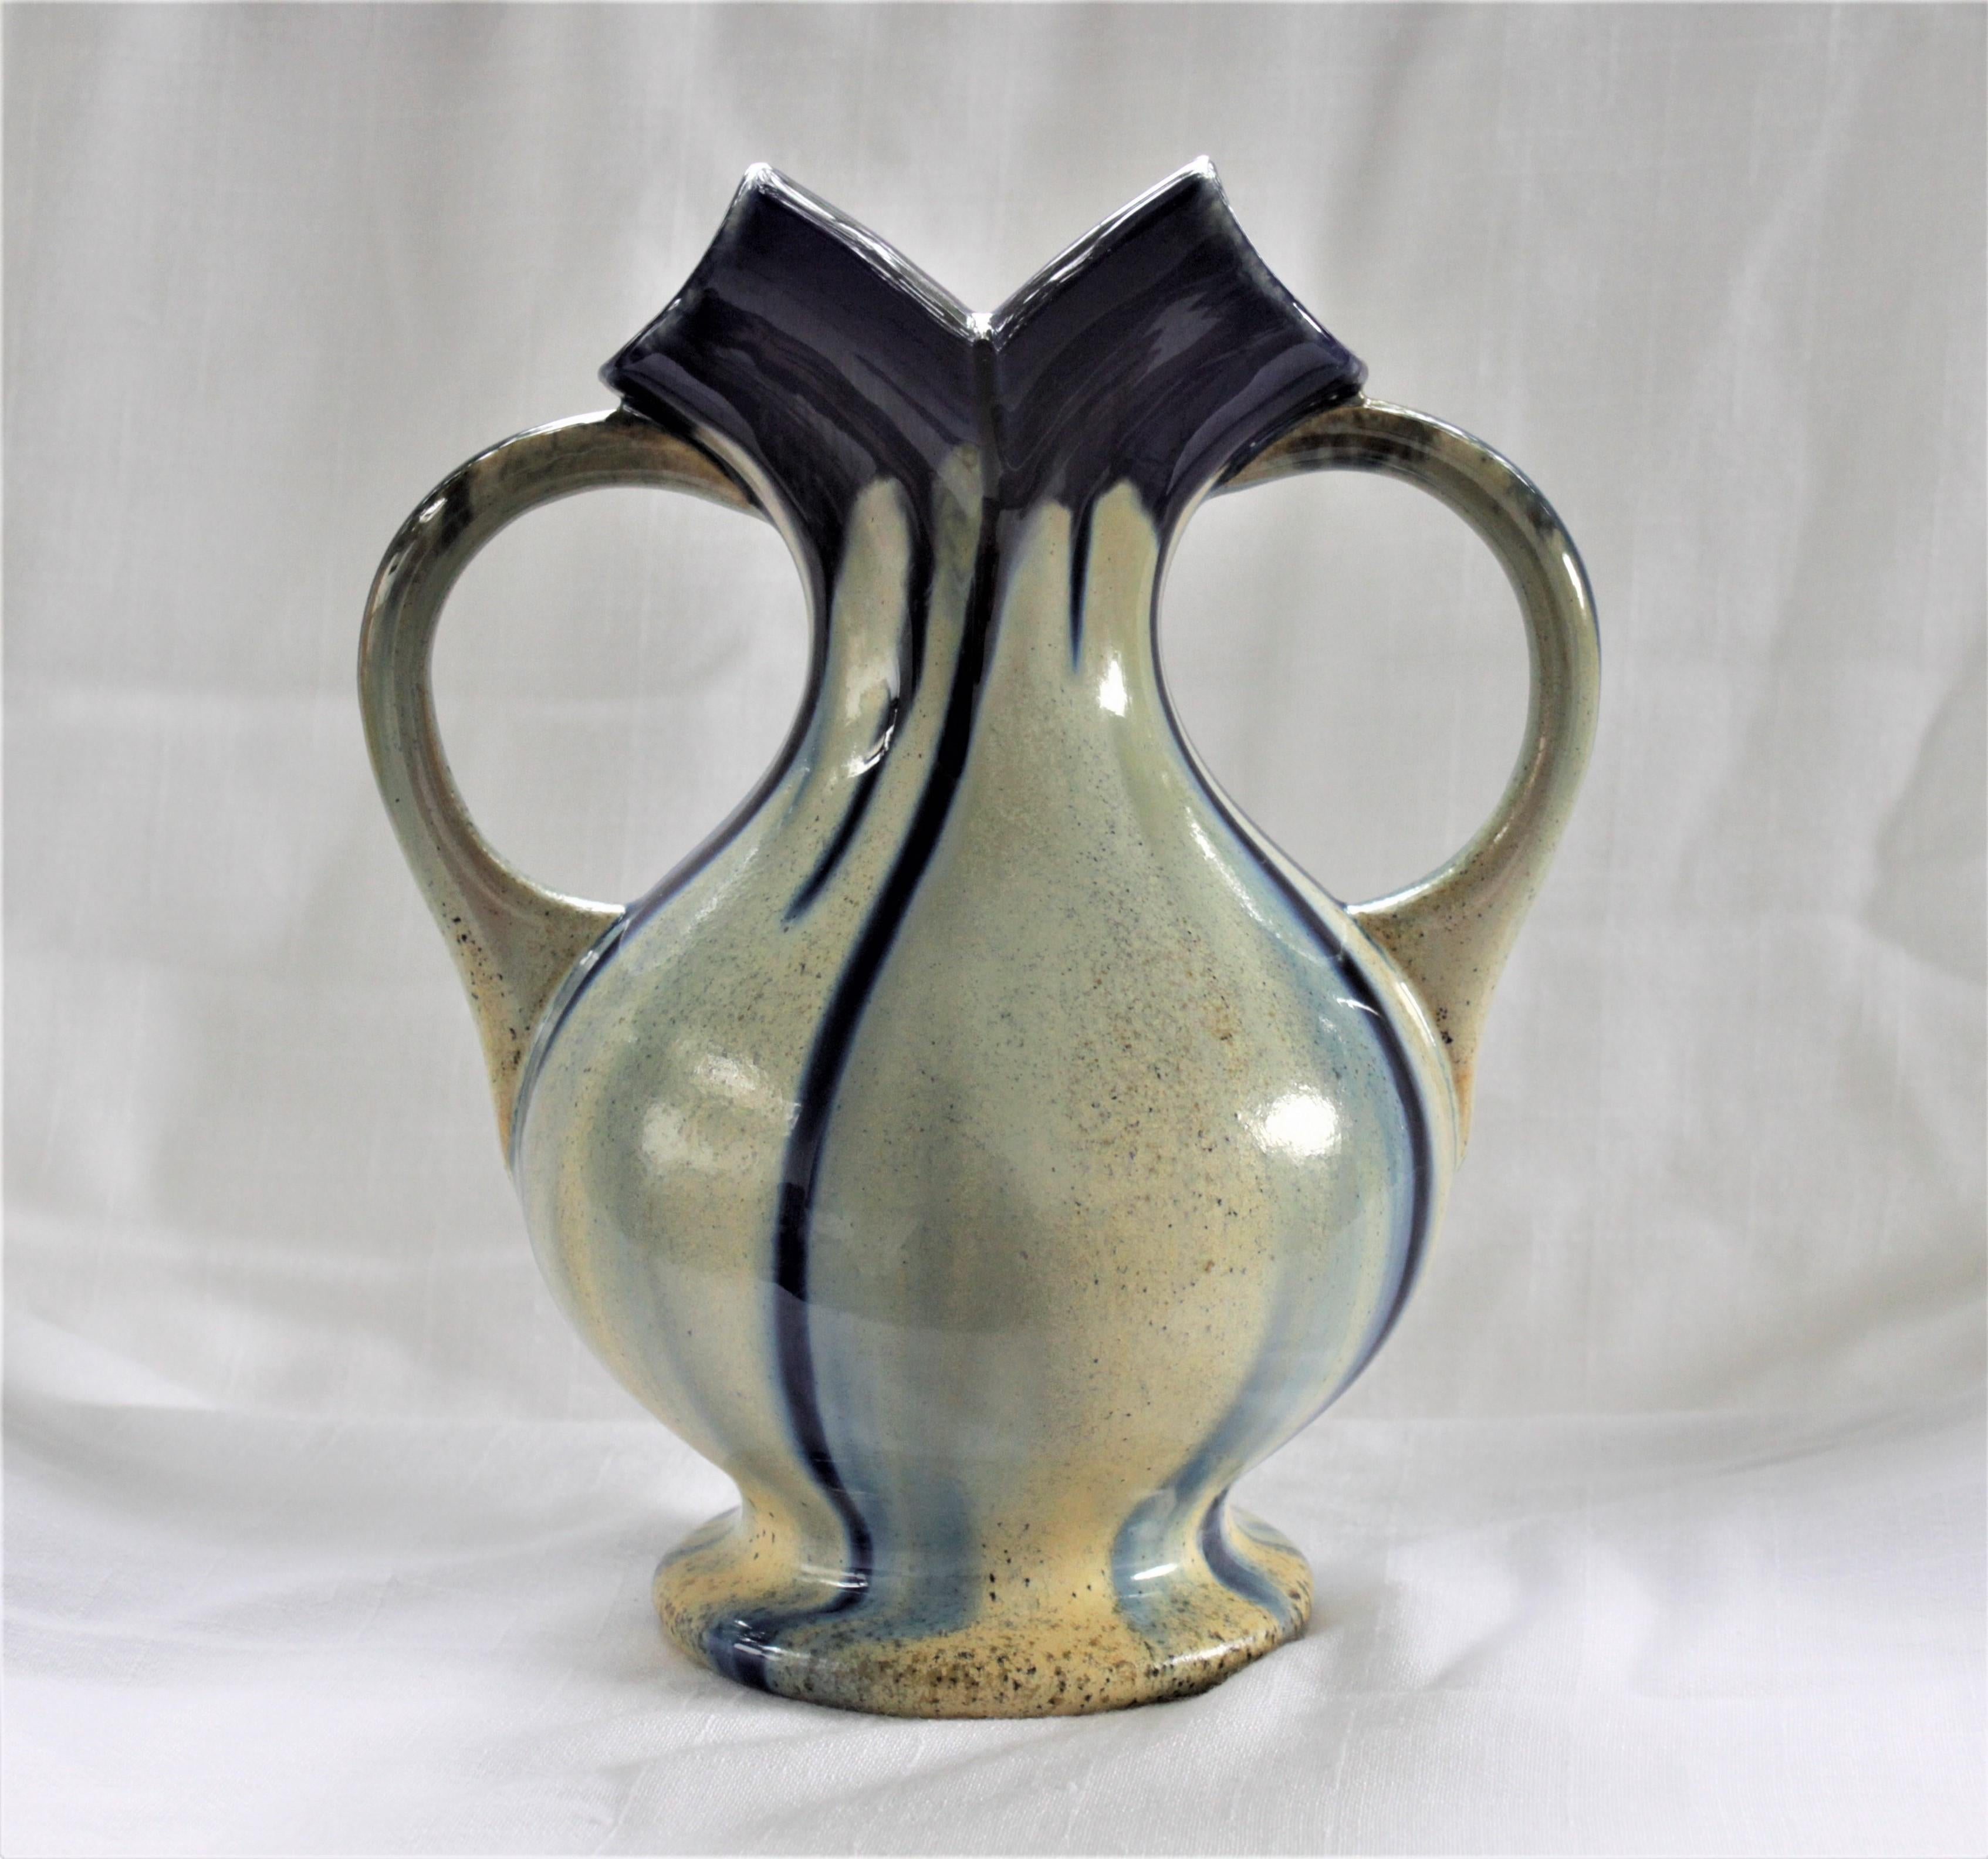 This double handled wedding vase is attributed to the Faincerie Therin Pottery Company of Belgium and dates to the Art Deco period. The vase is done in a brown earthenware pottery with a cream over-glaze and a cobalt blue and brown drip glaze. This